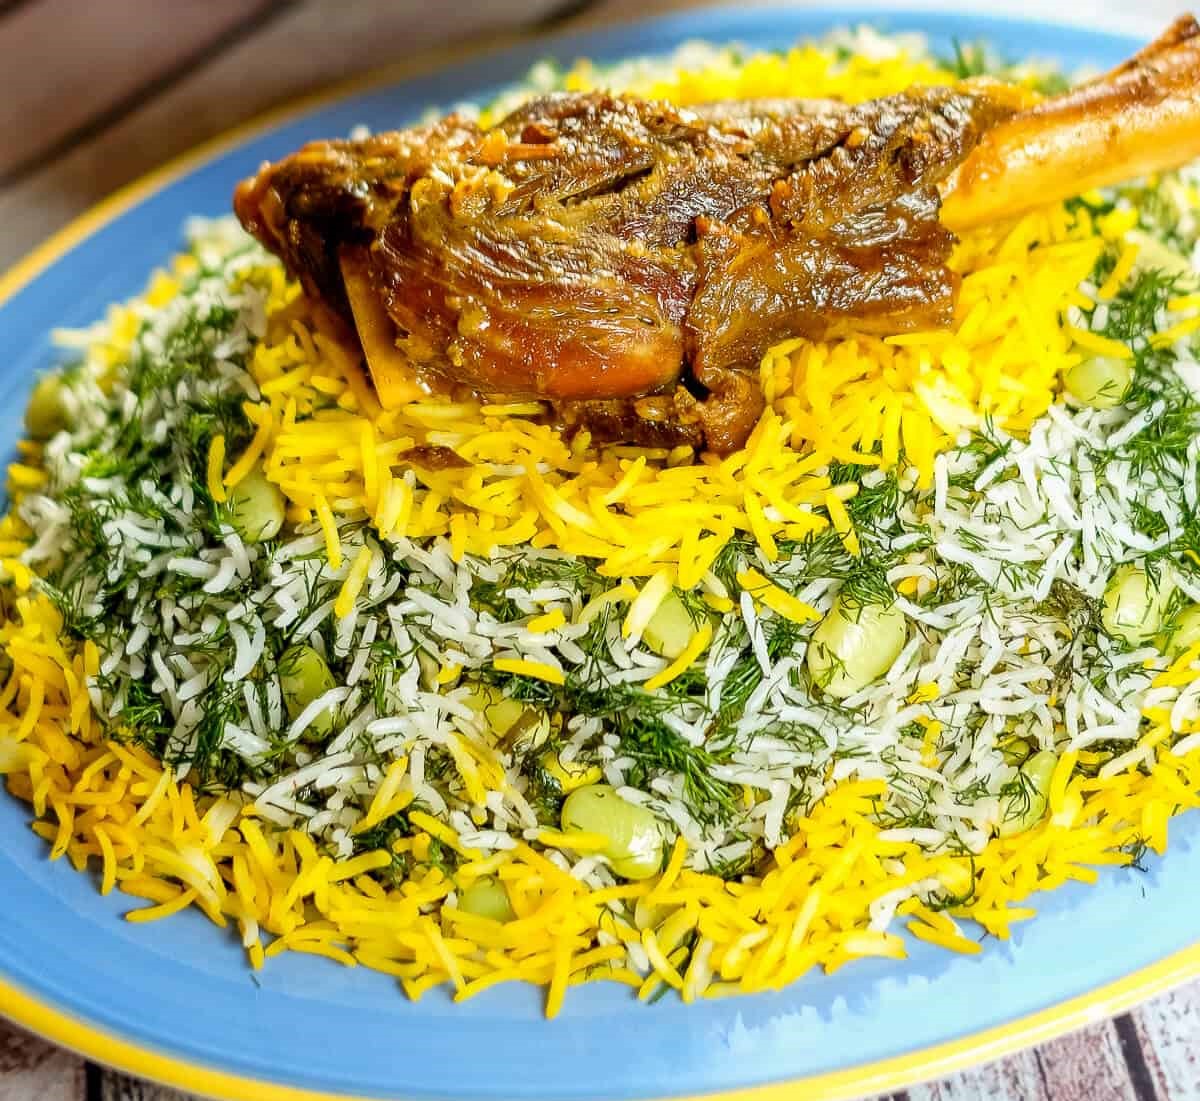 Baghali Polo: A Culinary Delight from Iran